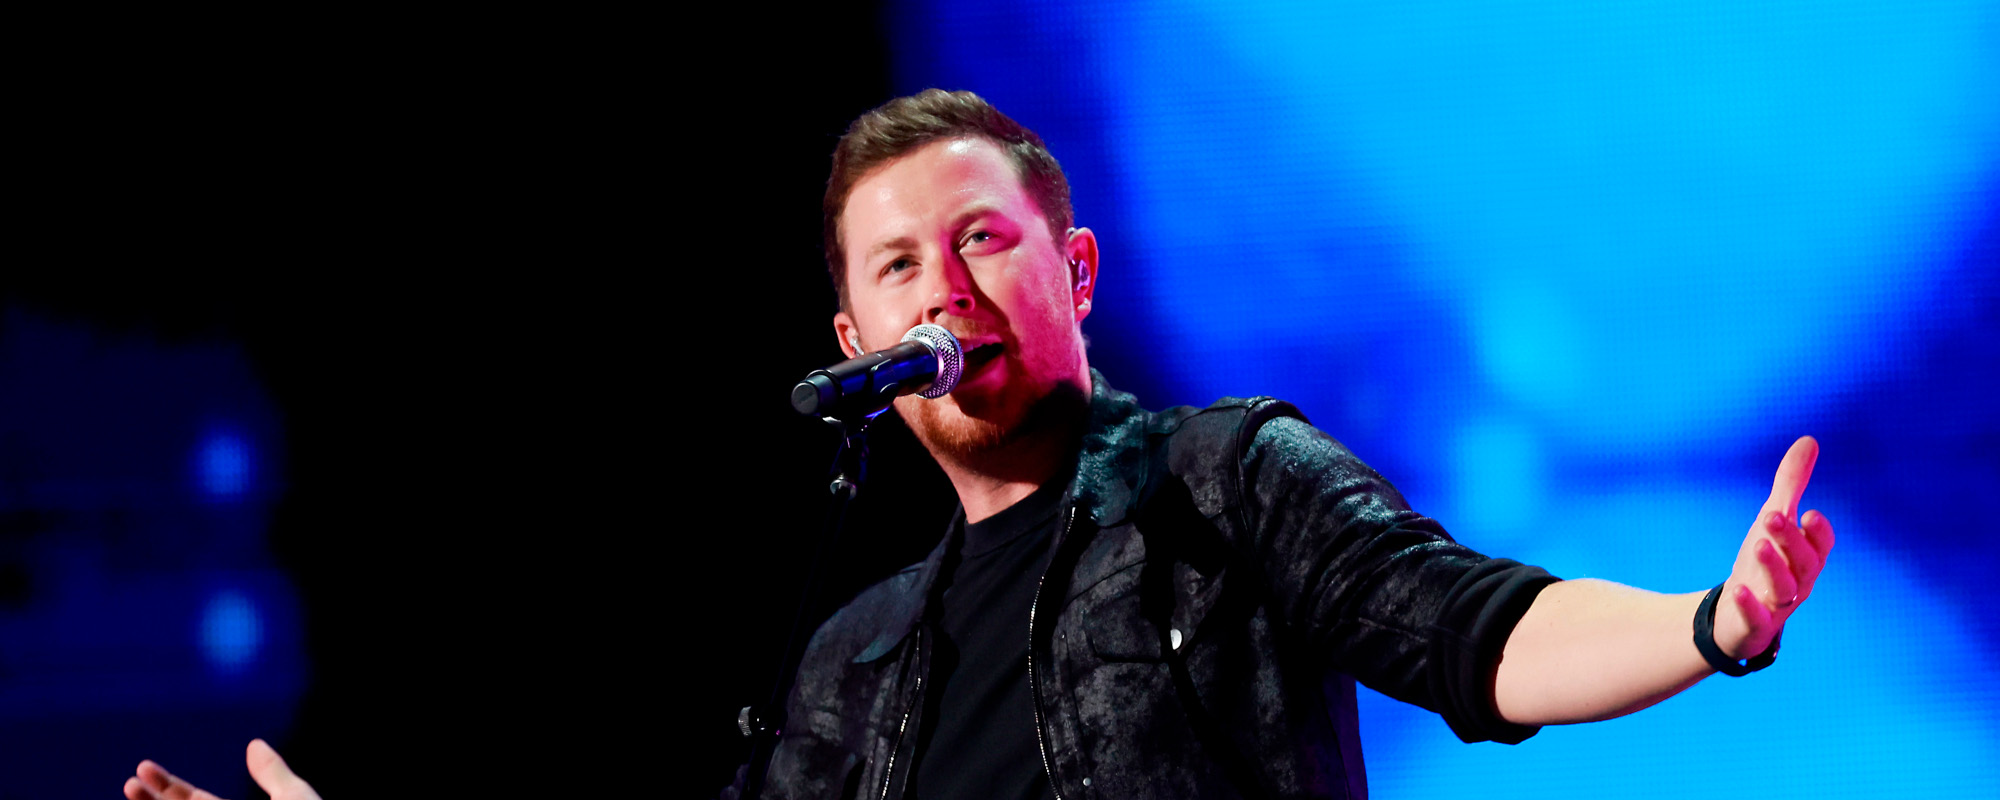 3 Songs and 3 Hopes for Scotty McCreery on His 30th Birthday